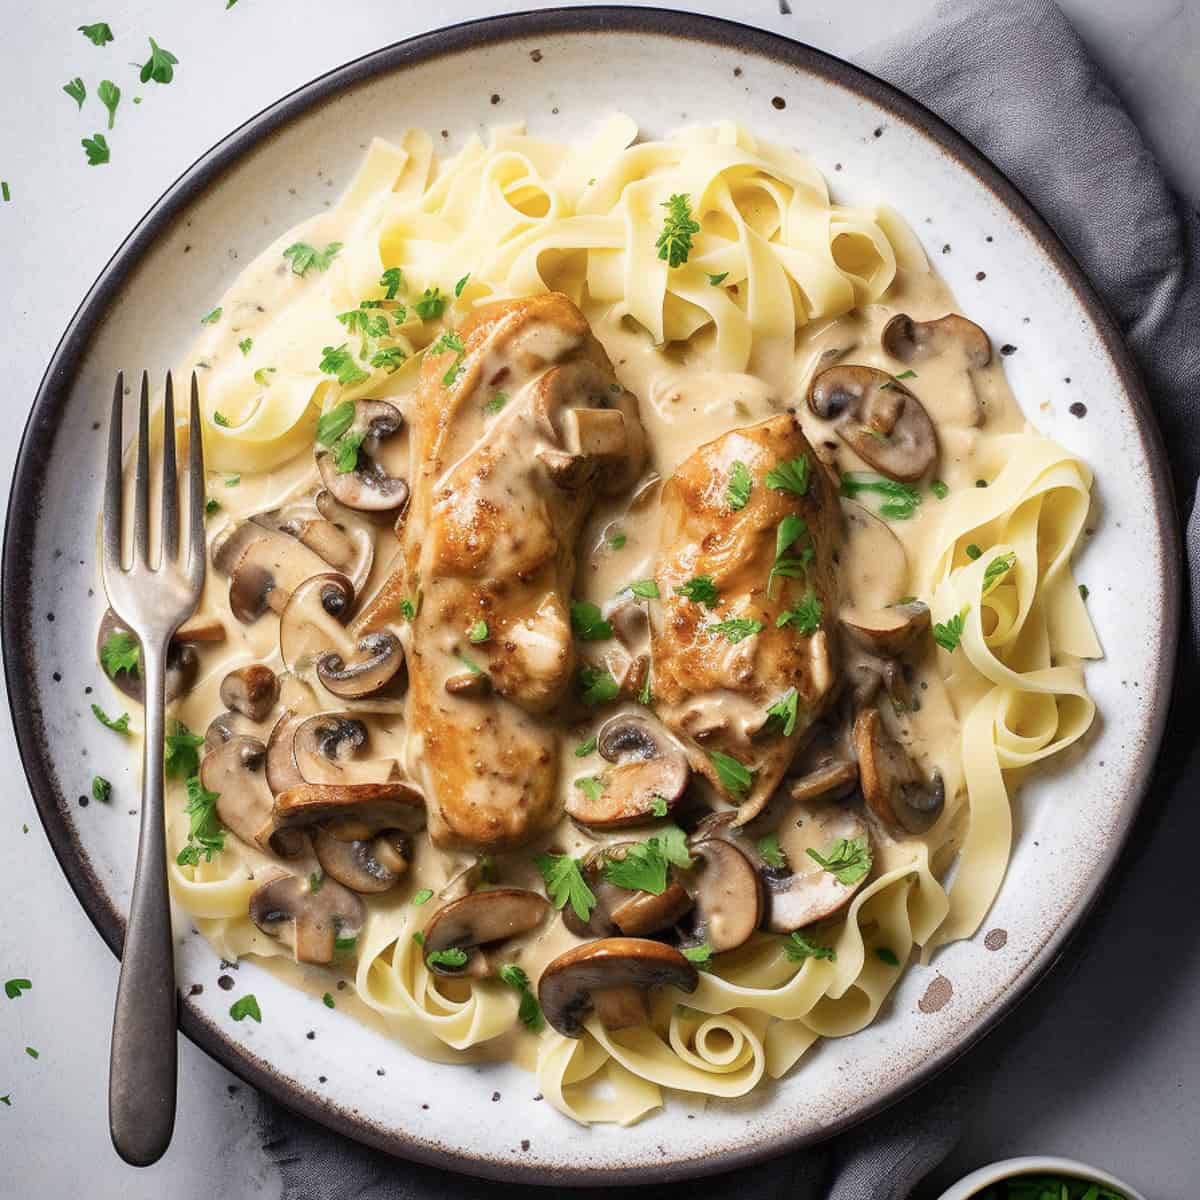 Chicken stroganoff with egg noodles on a plate.